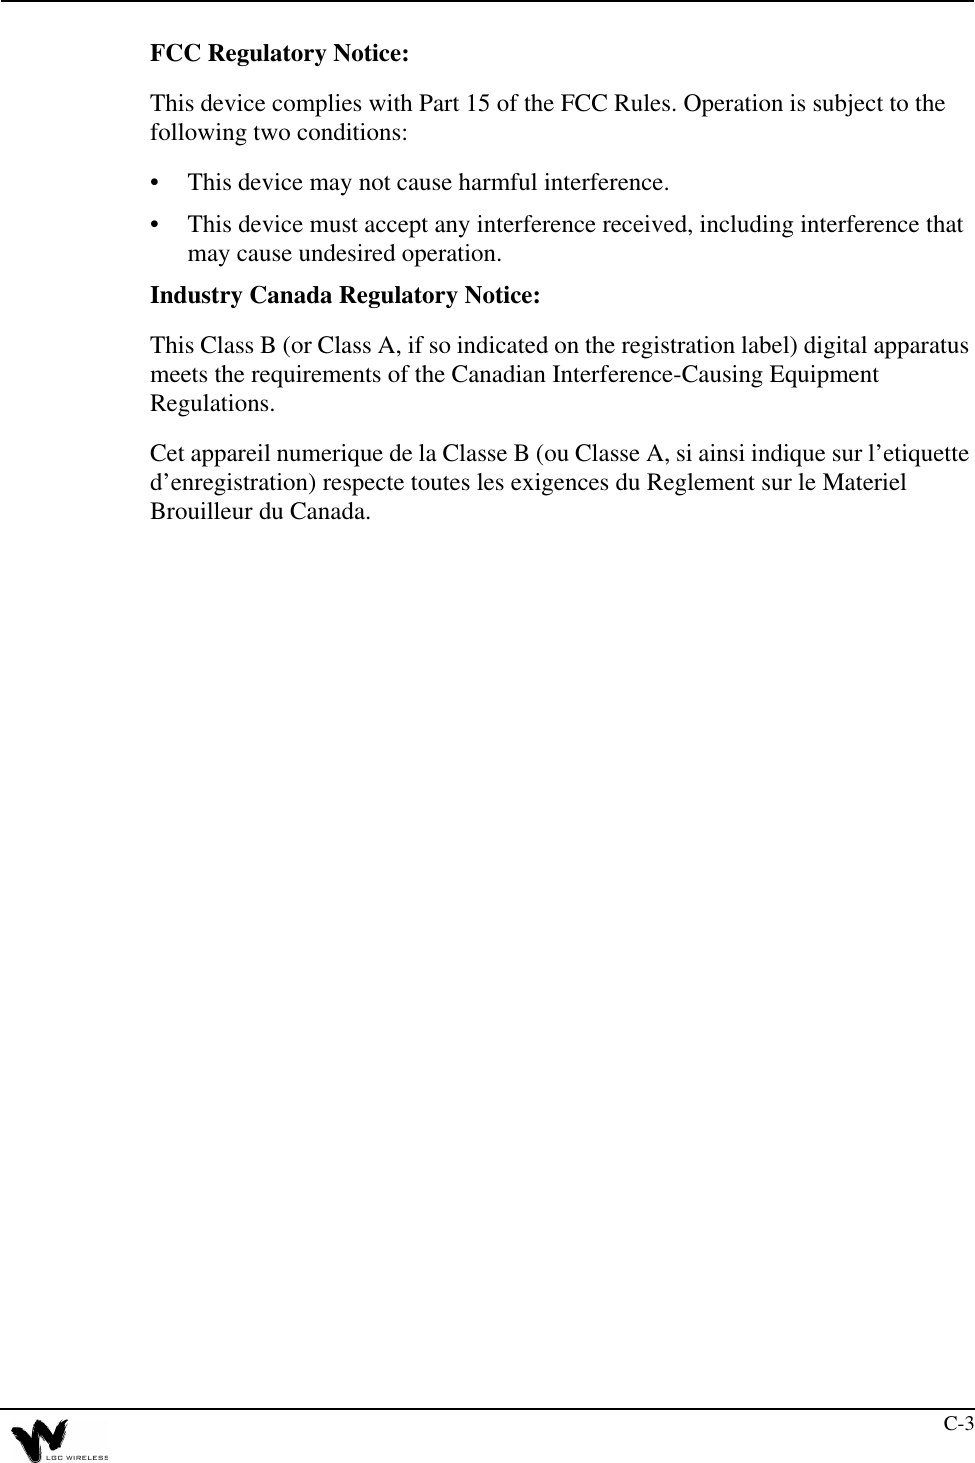 C-3FCC Regulatory Notice:This device complies with Part 15 of the FCC Rules. Operation is subject to the following two conditions:•This device may not cause harmful interference.•This device must accept any interference received, including interference that may cause undesired operation.Industry Canada Regulatory Notice:This Class B (or Class A, if so indicated on the registration label) digital apparatus meets the requirements of the Canadian Interference-Causing Equipment Regulations.Cet appareil numerique de la Classe B (ou Classe A, si ainsi indique sur l’etiquette d’enregistration) respecte toutes les exigences du Reglement sur le Materiel Brouilleur du Canada.